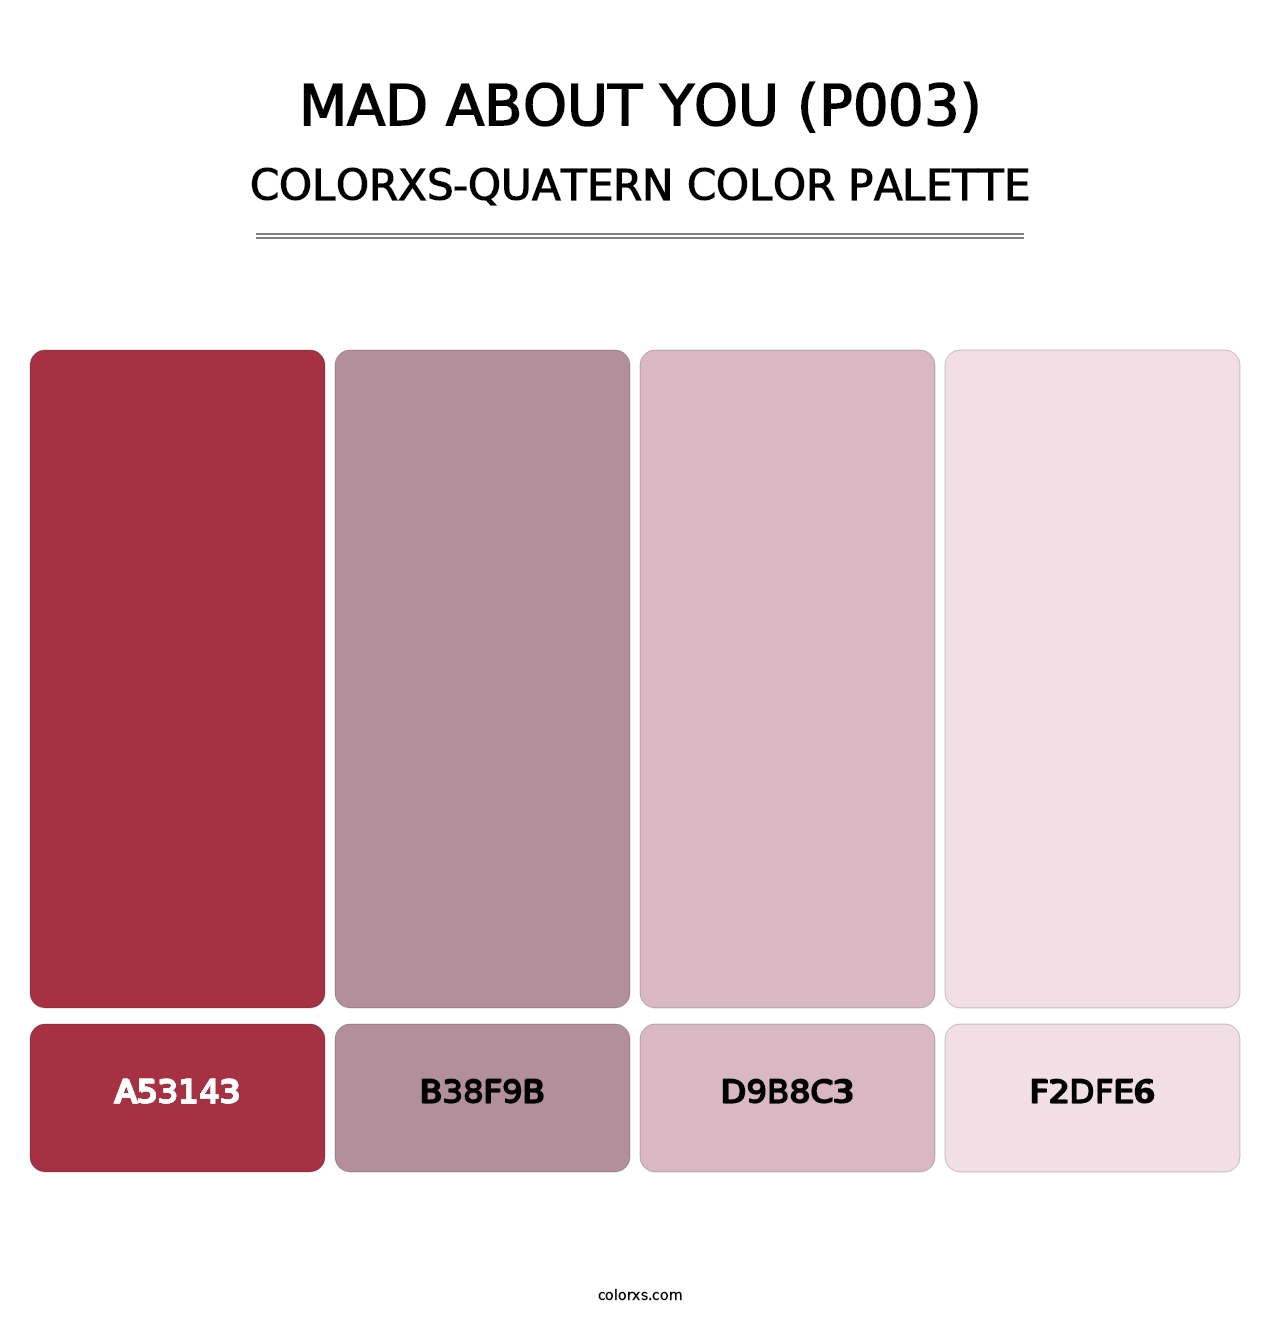 Mad About You (P003) - Colorxs Quatern Palette